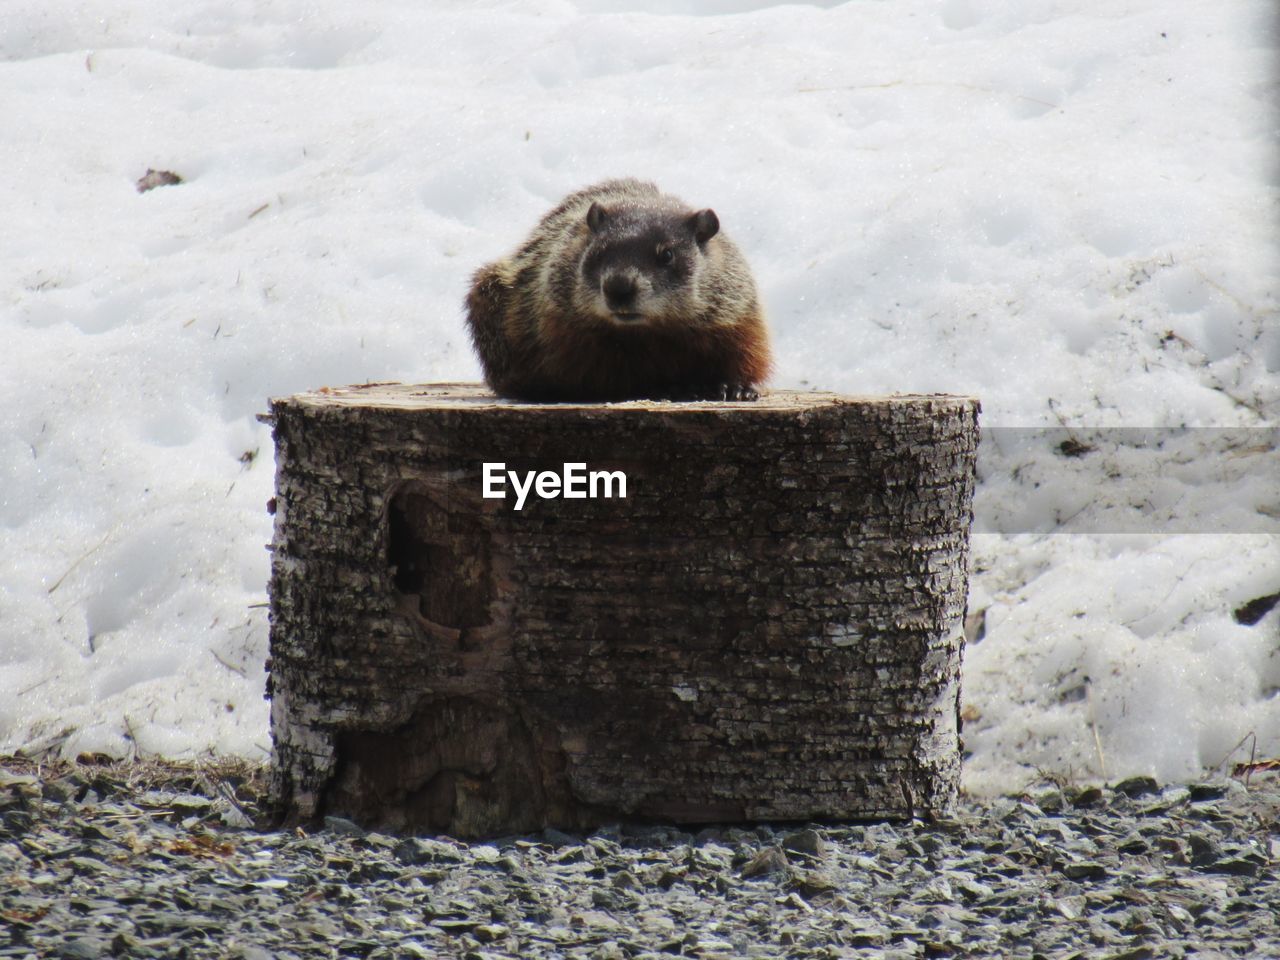 Woodchuck sitting on wood during winter